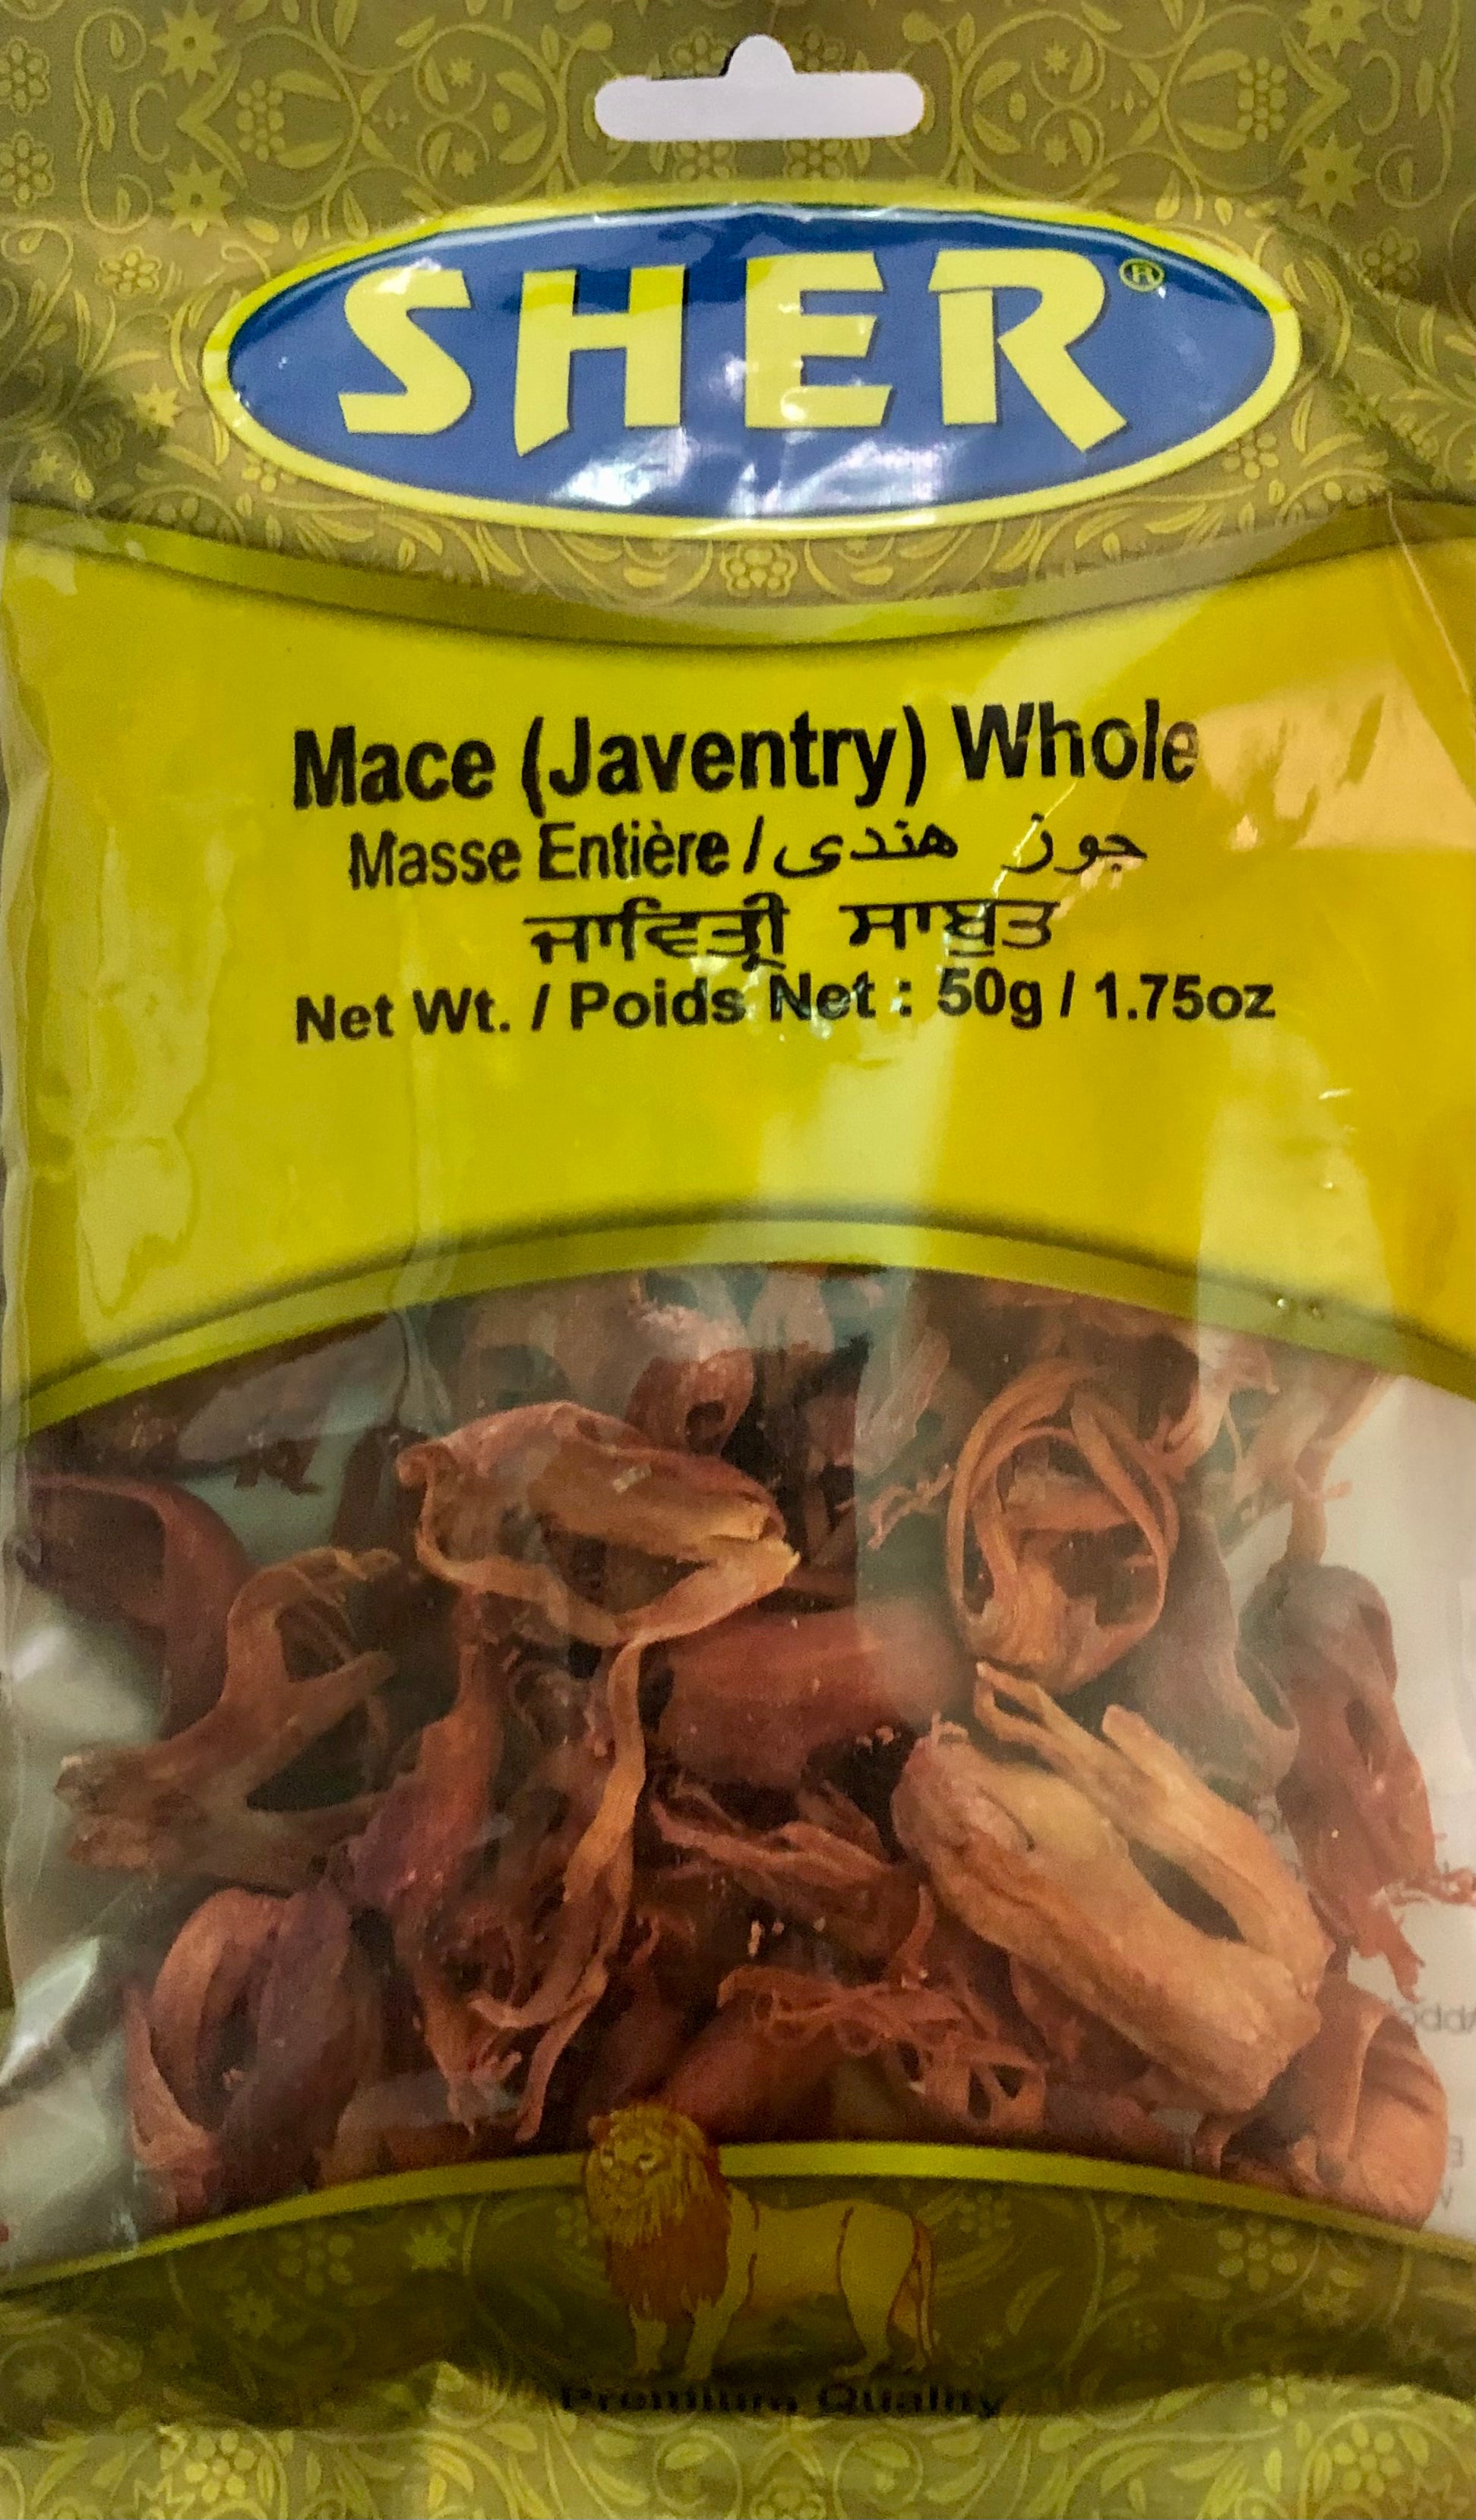 Mace (Javentry) Whole - 50gm -  Sher